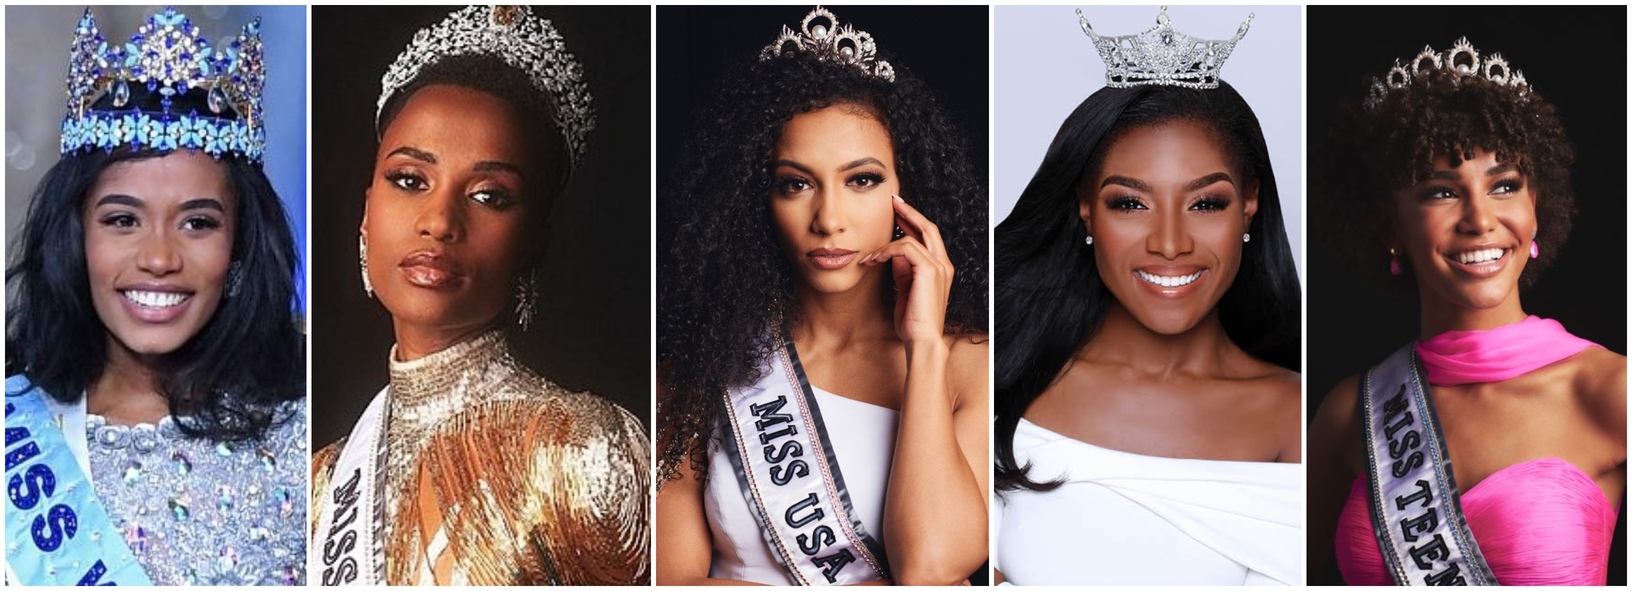 Black Beauty Takes The Crown At Major Beauty Pageants Minnesota